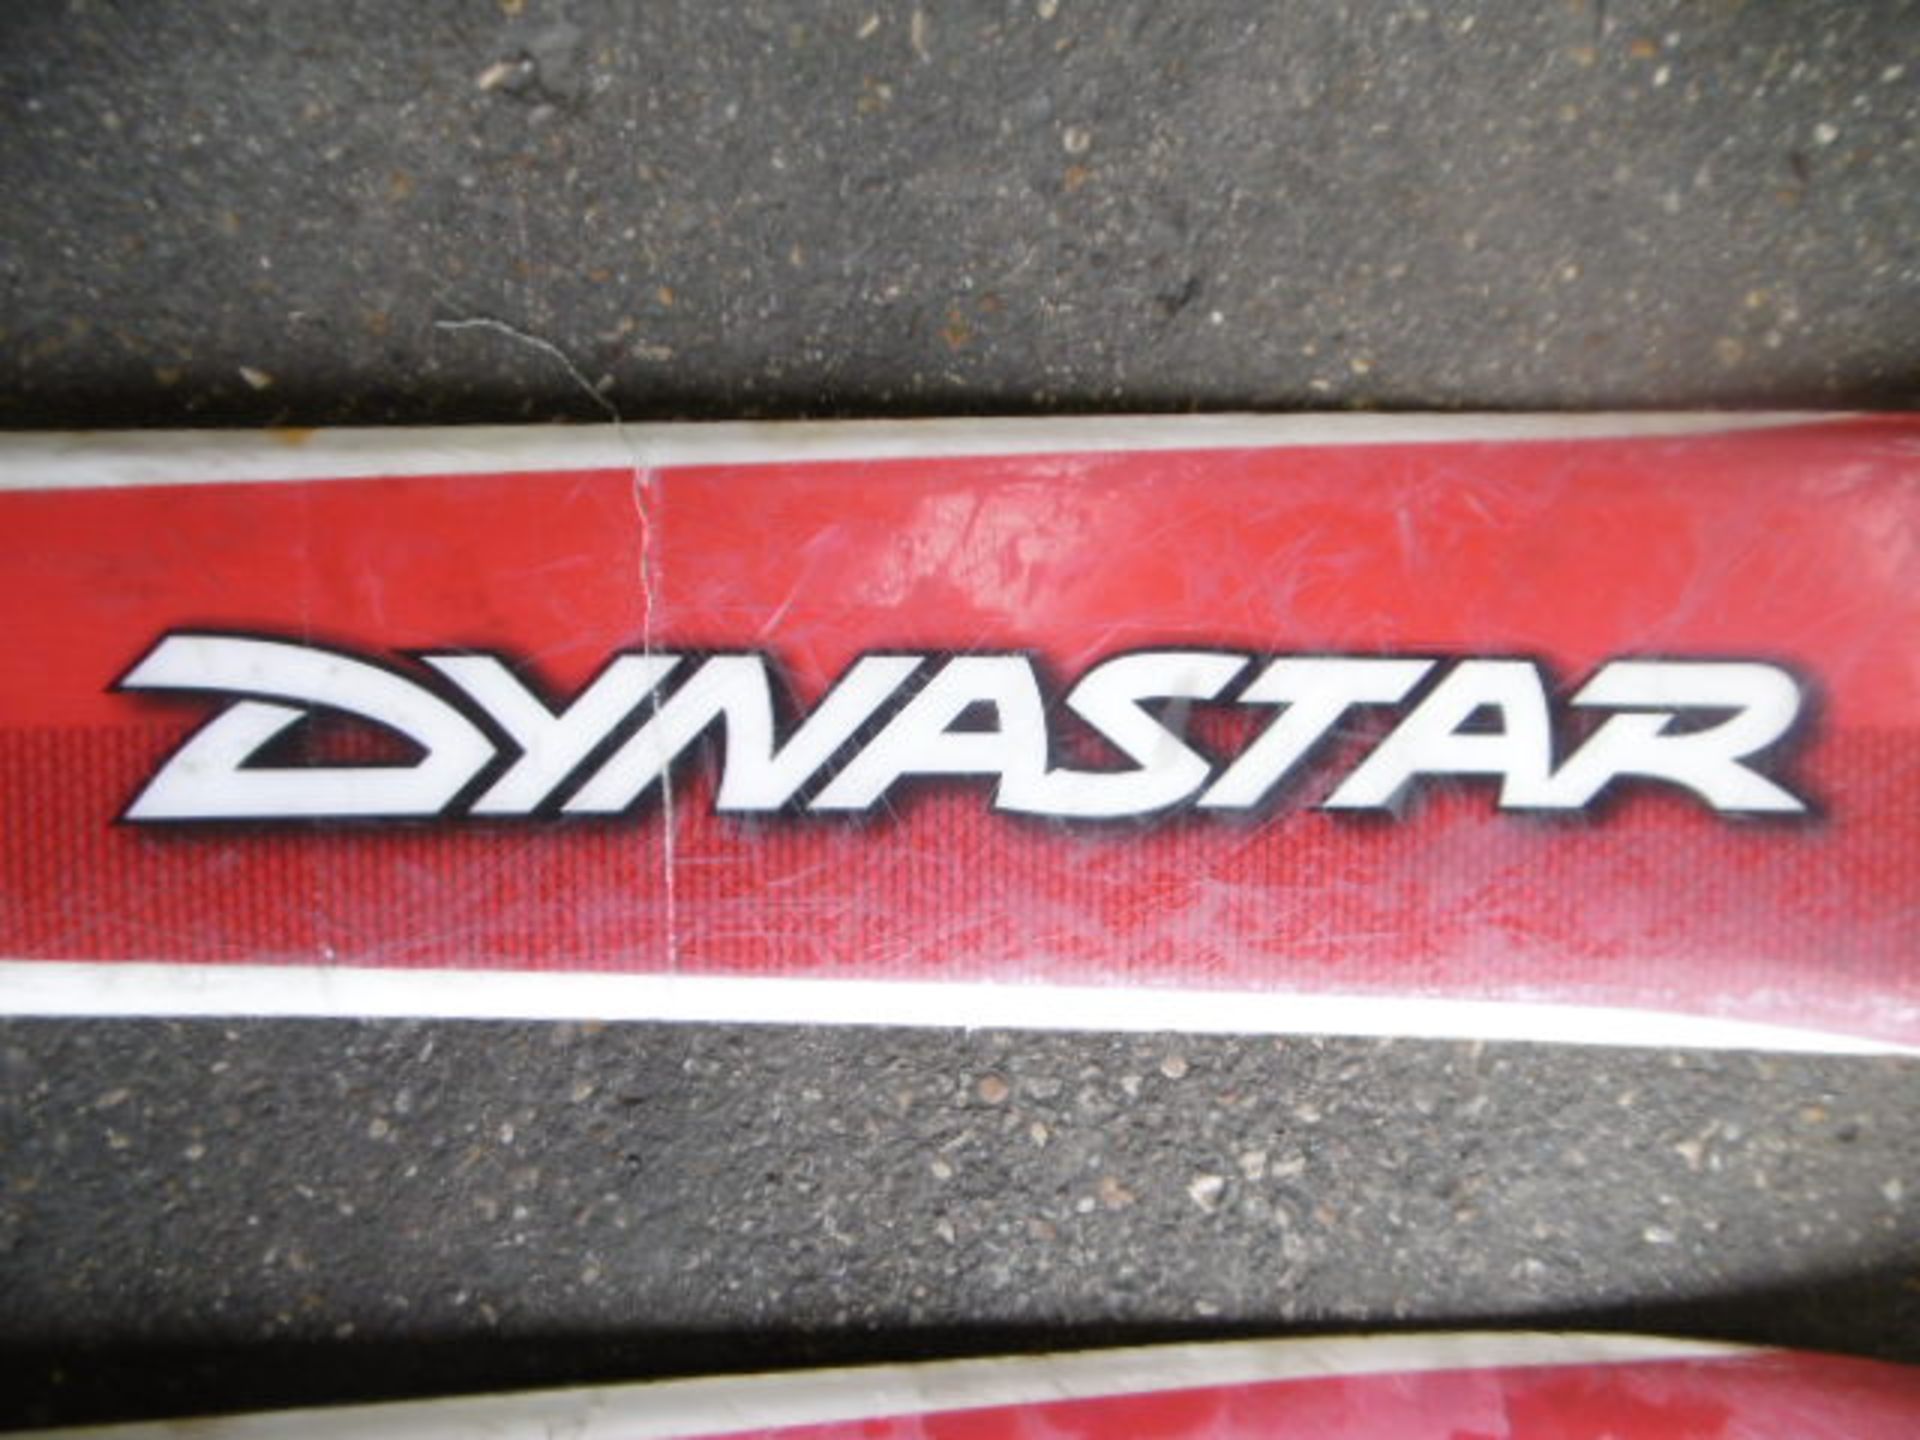 Dynastar Omedrive 06 Speed Skis - Image 4 of 7